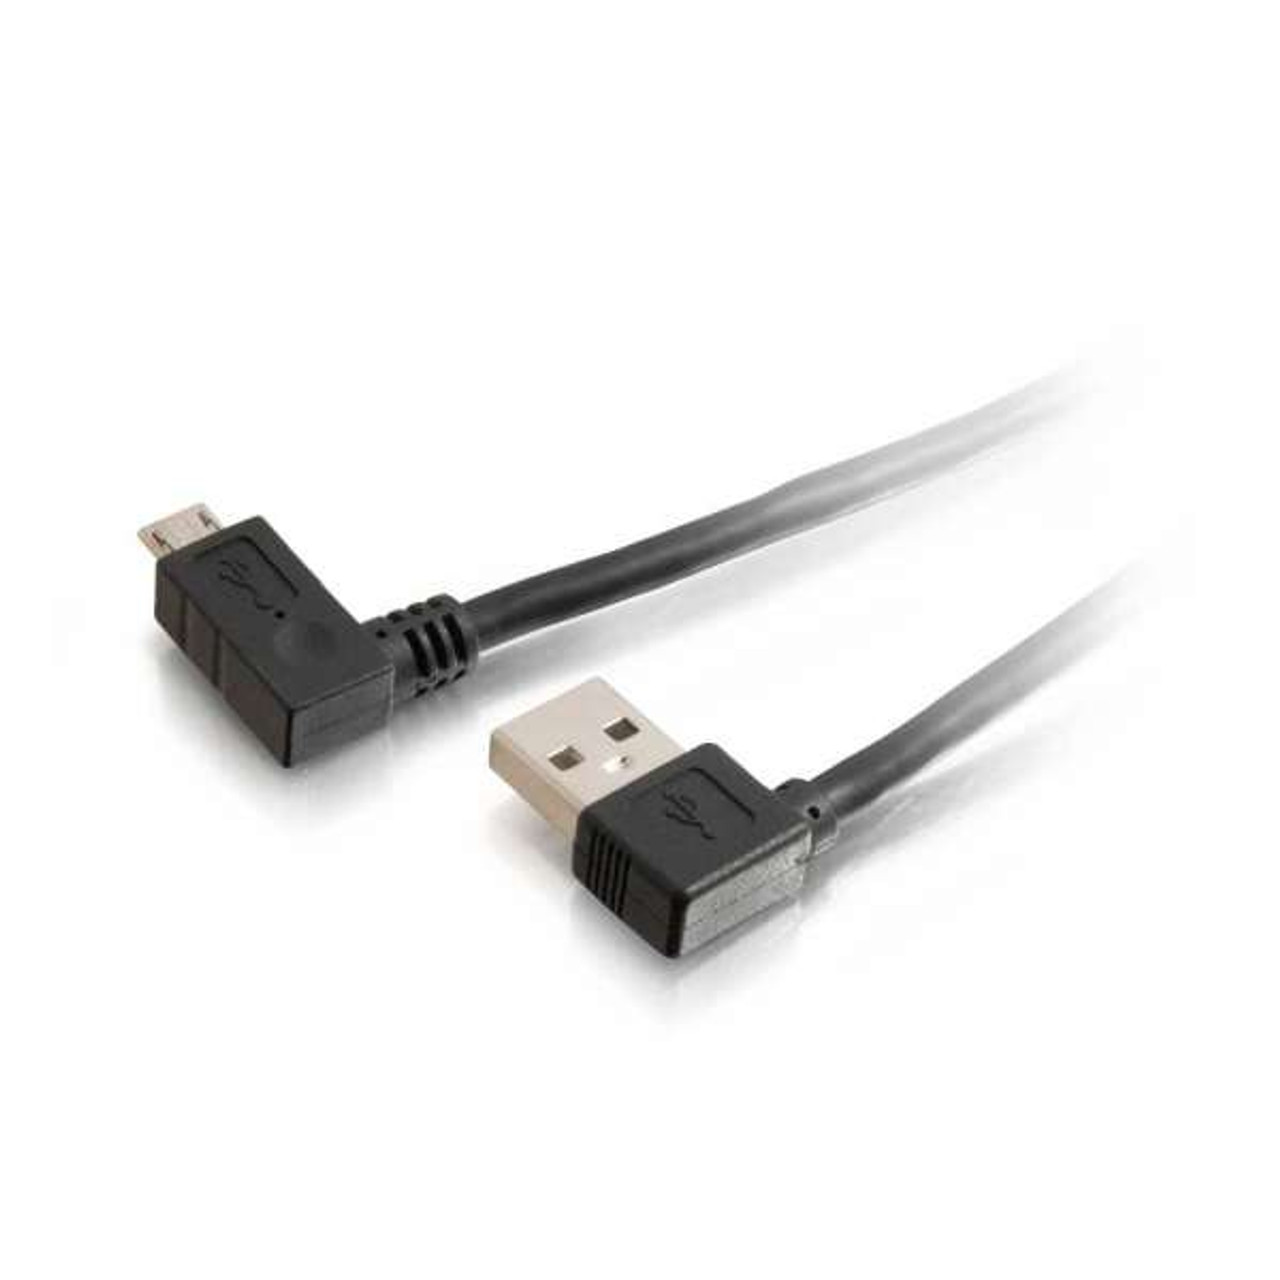 3.3ft (1m) USB 3.0 A Male to Micro B Male Cable